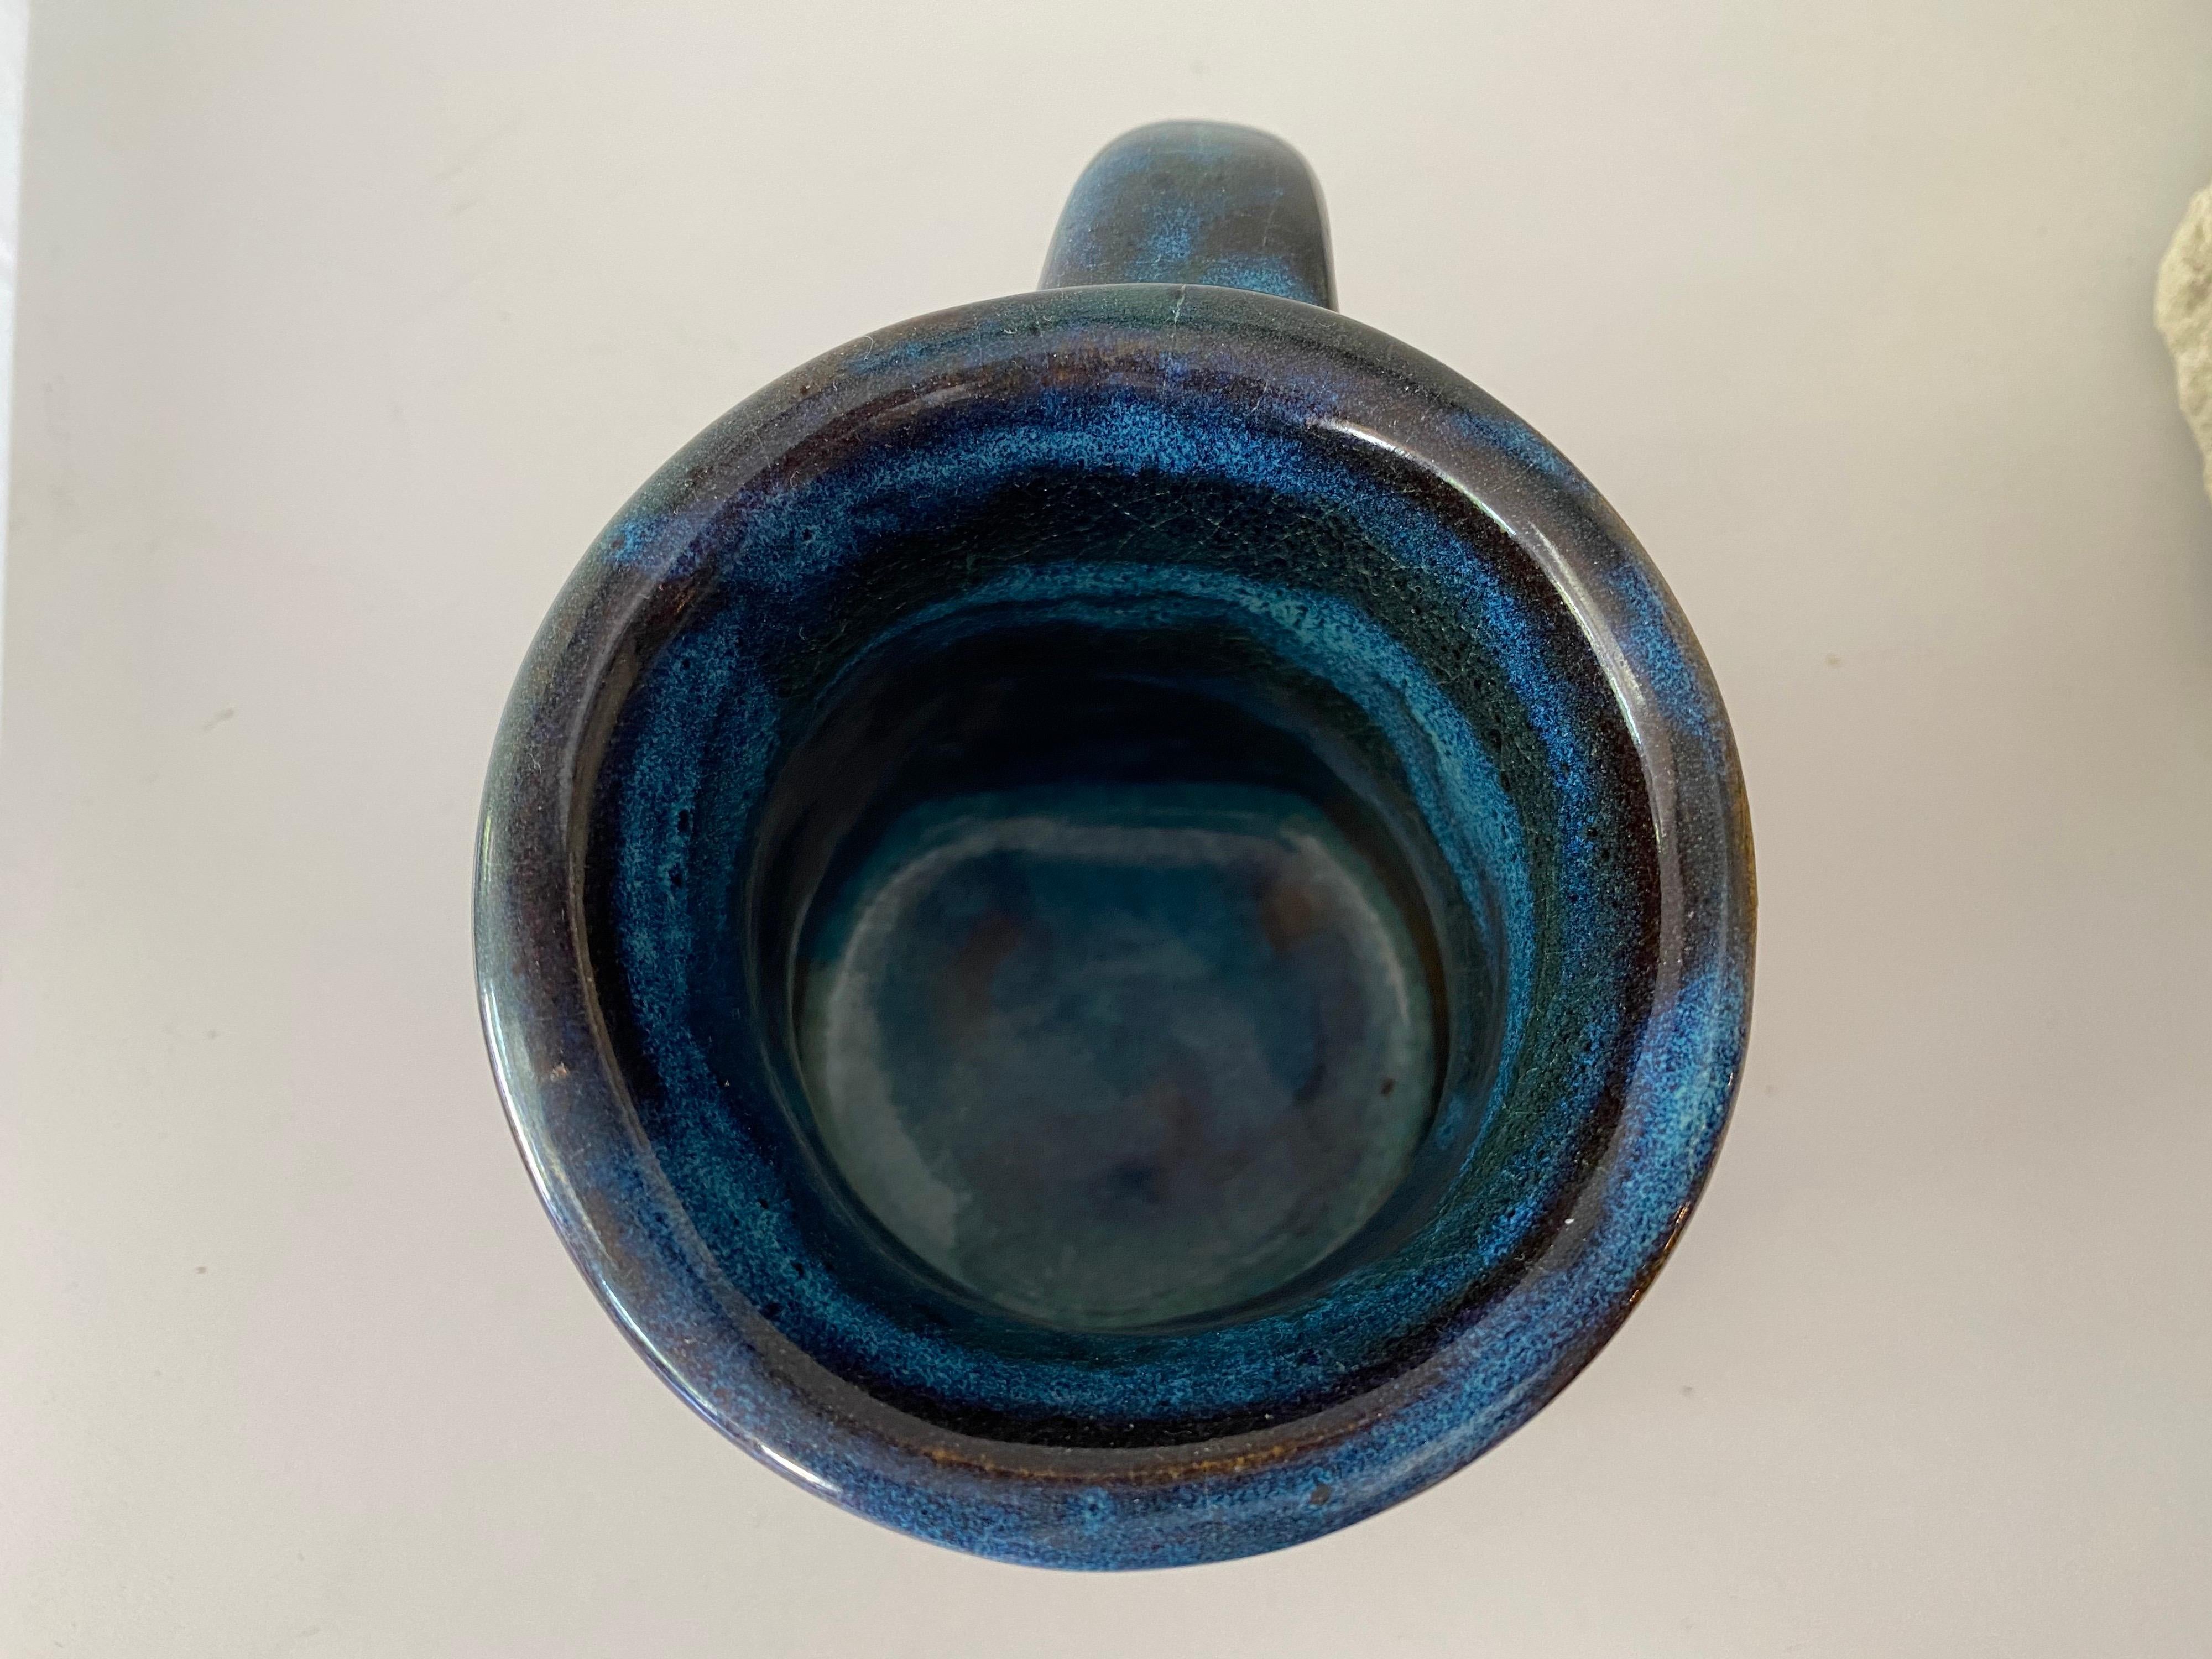 Vintage pottery designed by Texas artist Harding Black, known for being a pioneer of modern handmade pottery in Texas.